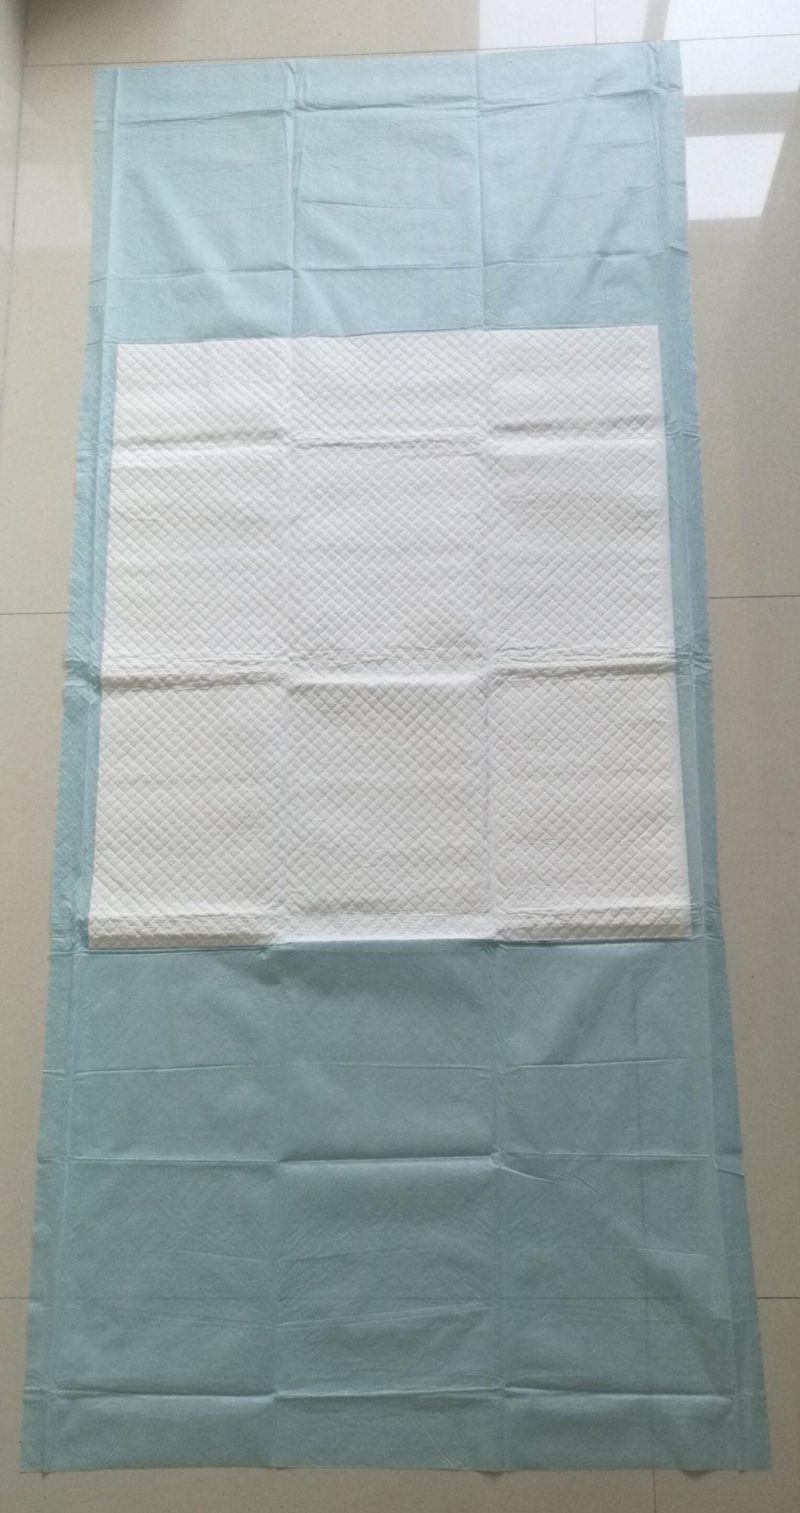 Underpad Large Incontinence Bed Pads Hospital Pad 80*180 with Un-Slip Backsheet Factory Price Extra Large Disposable Bed Pads Adult Underpads Adult Bed Pads